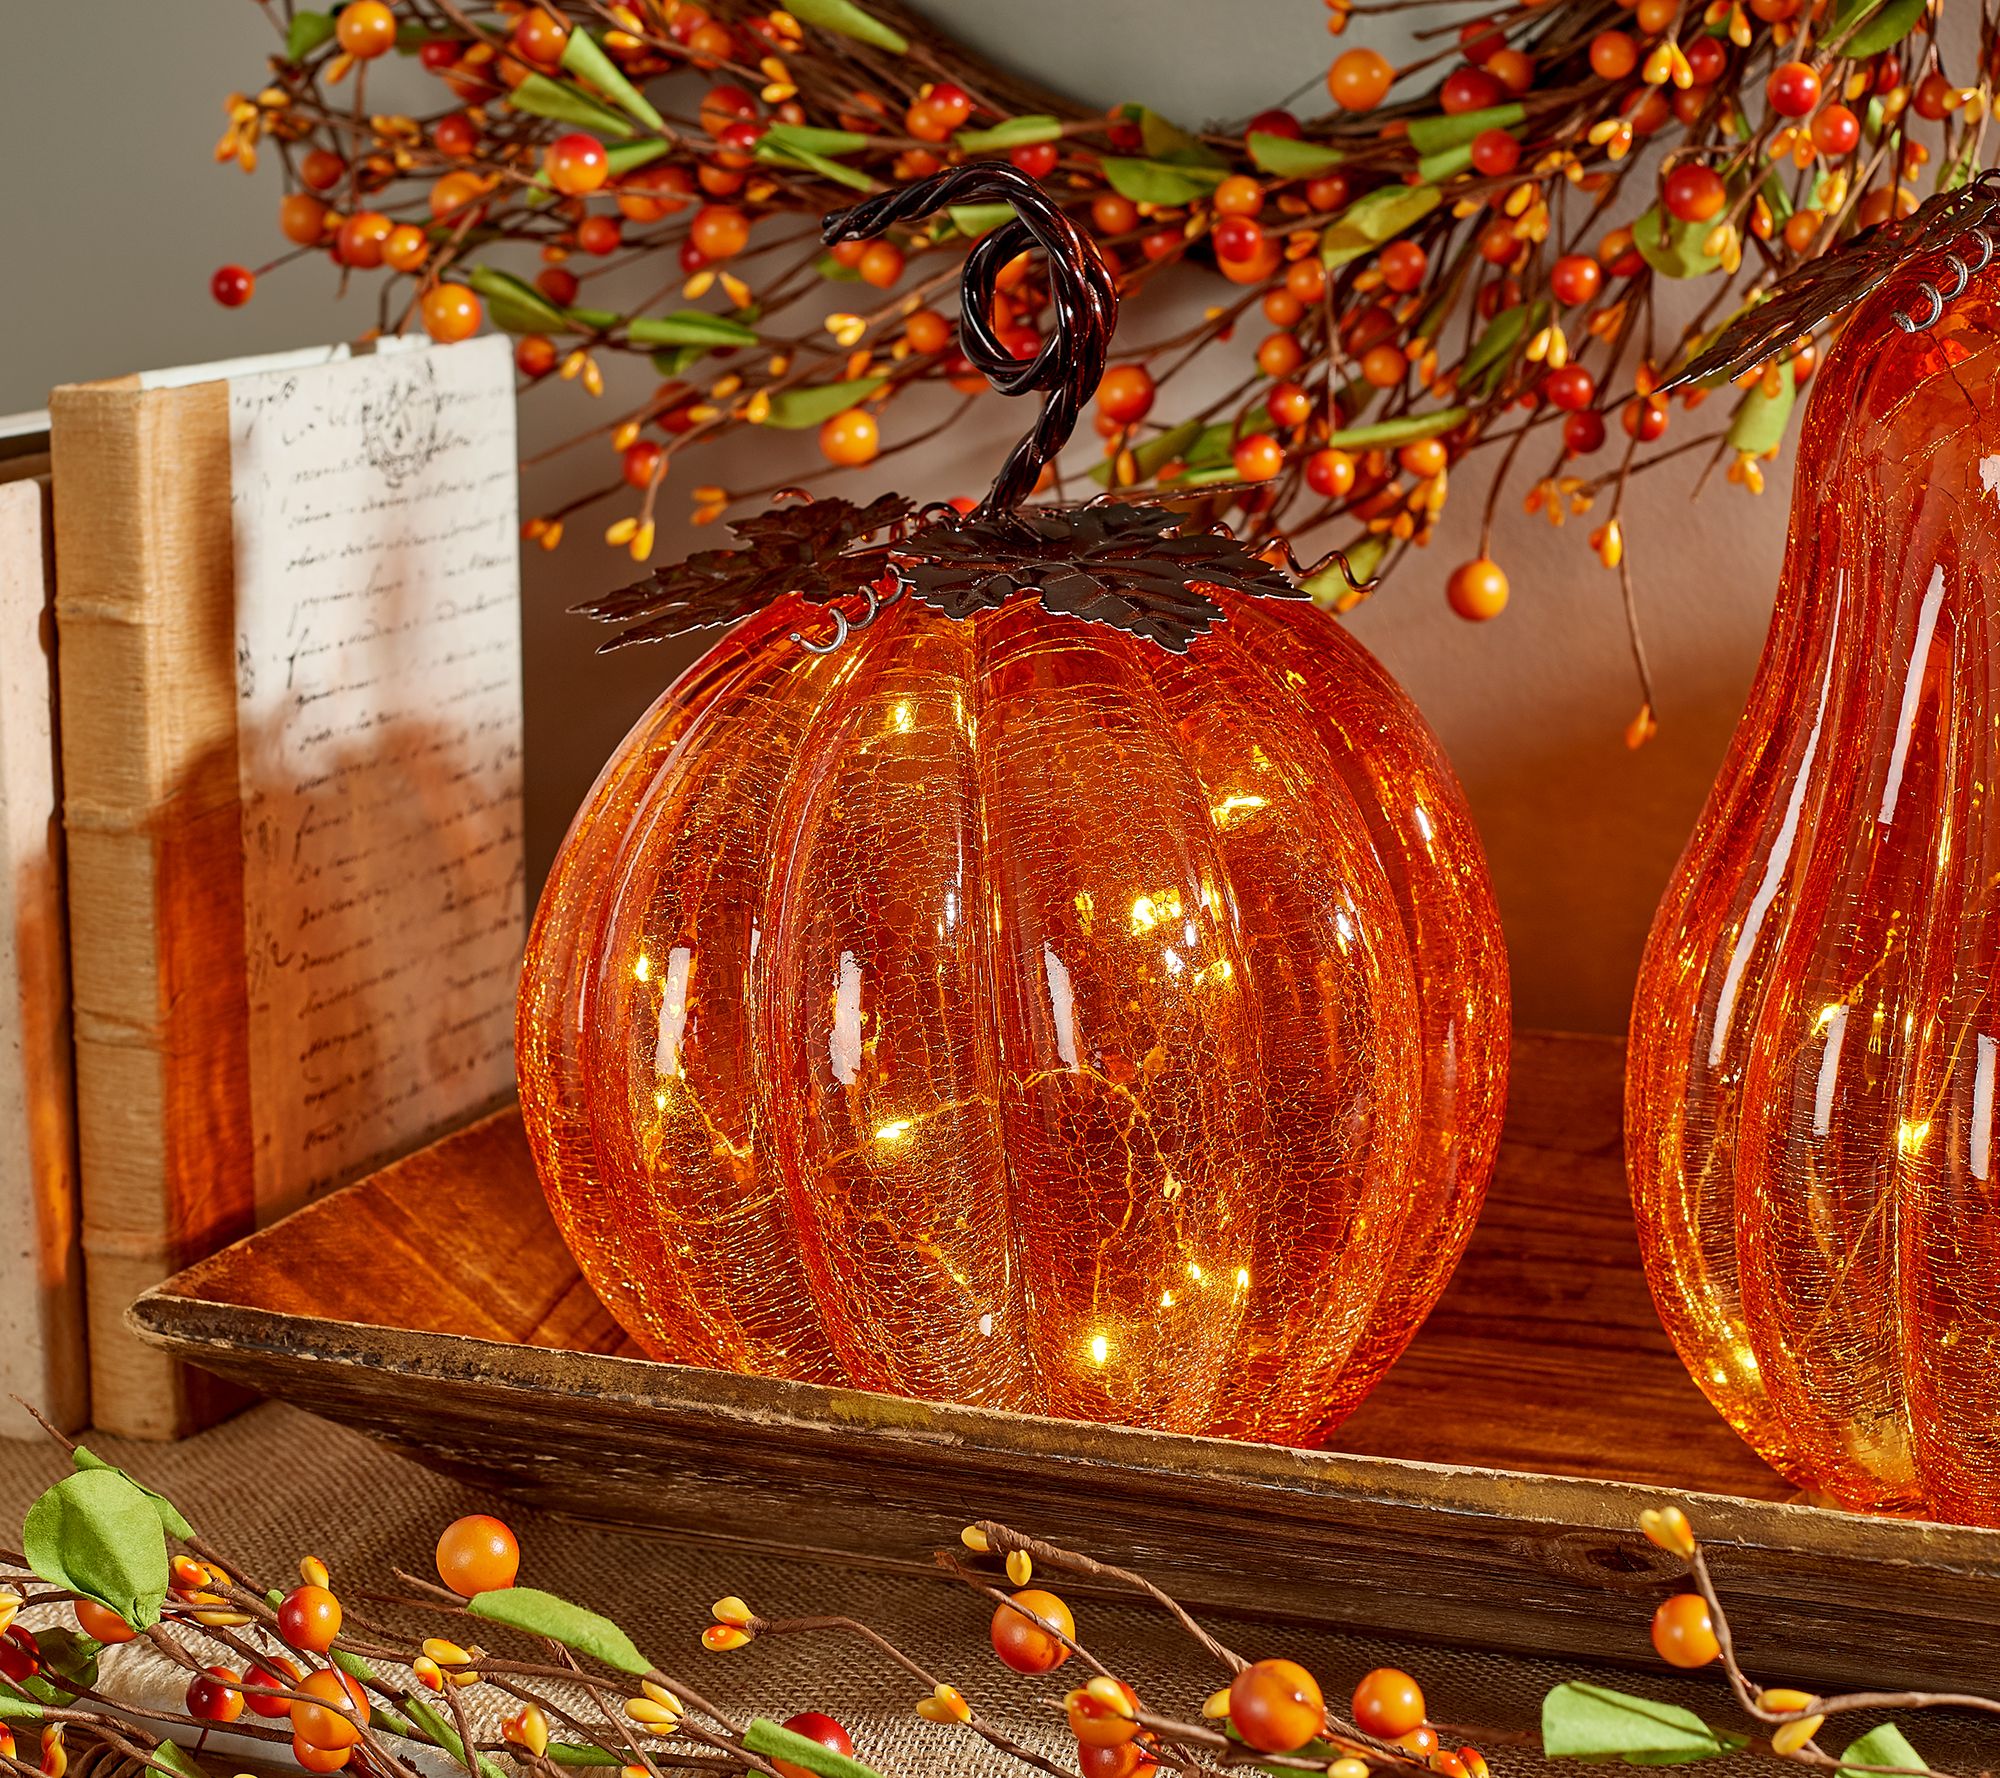 "As Is" Illuminated Crackle Glass Pumpkin with Metal Accents - QVC.com